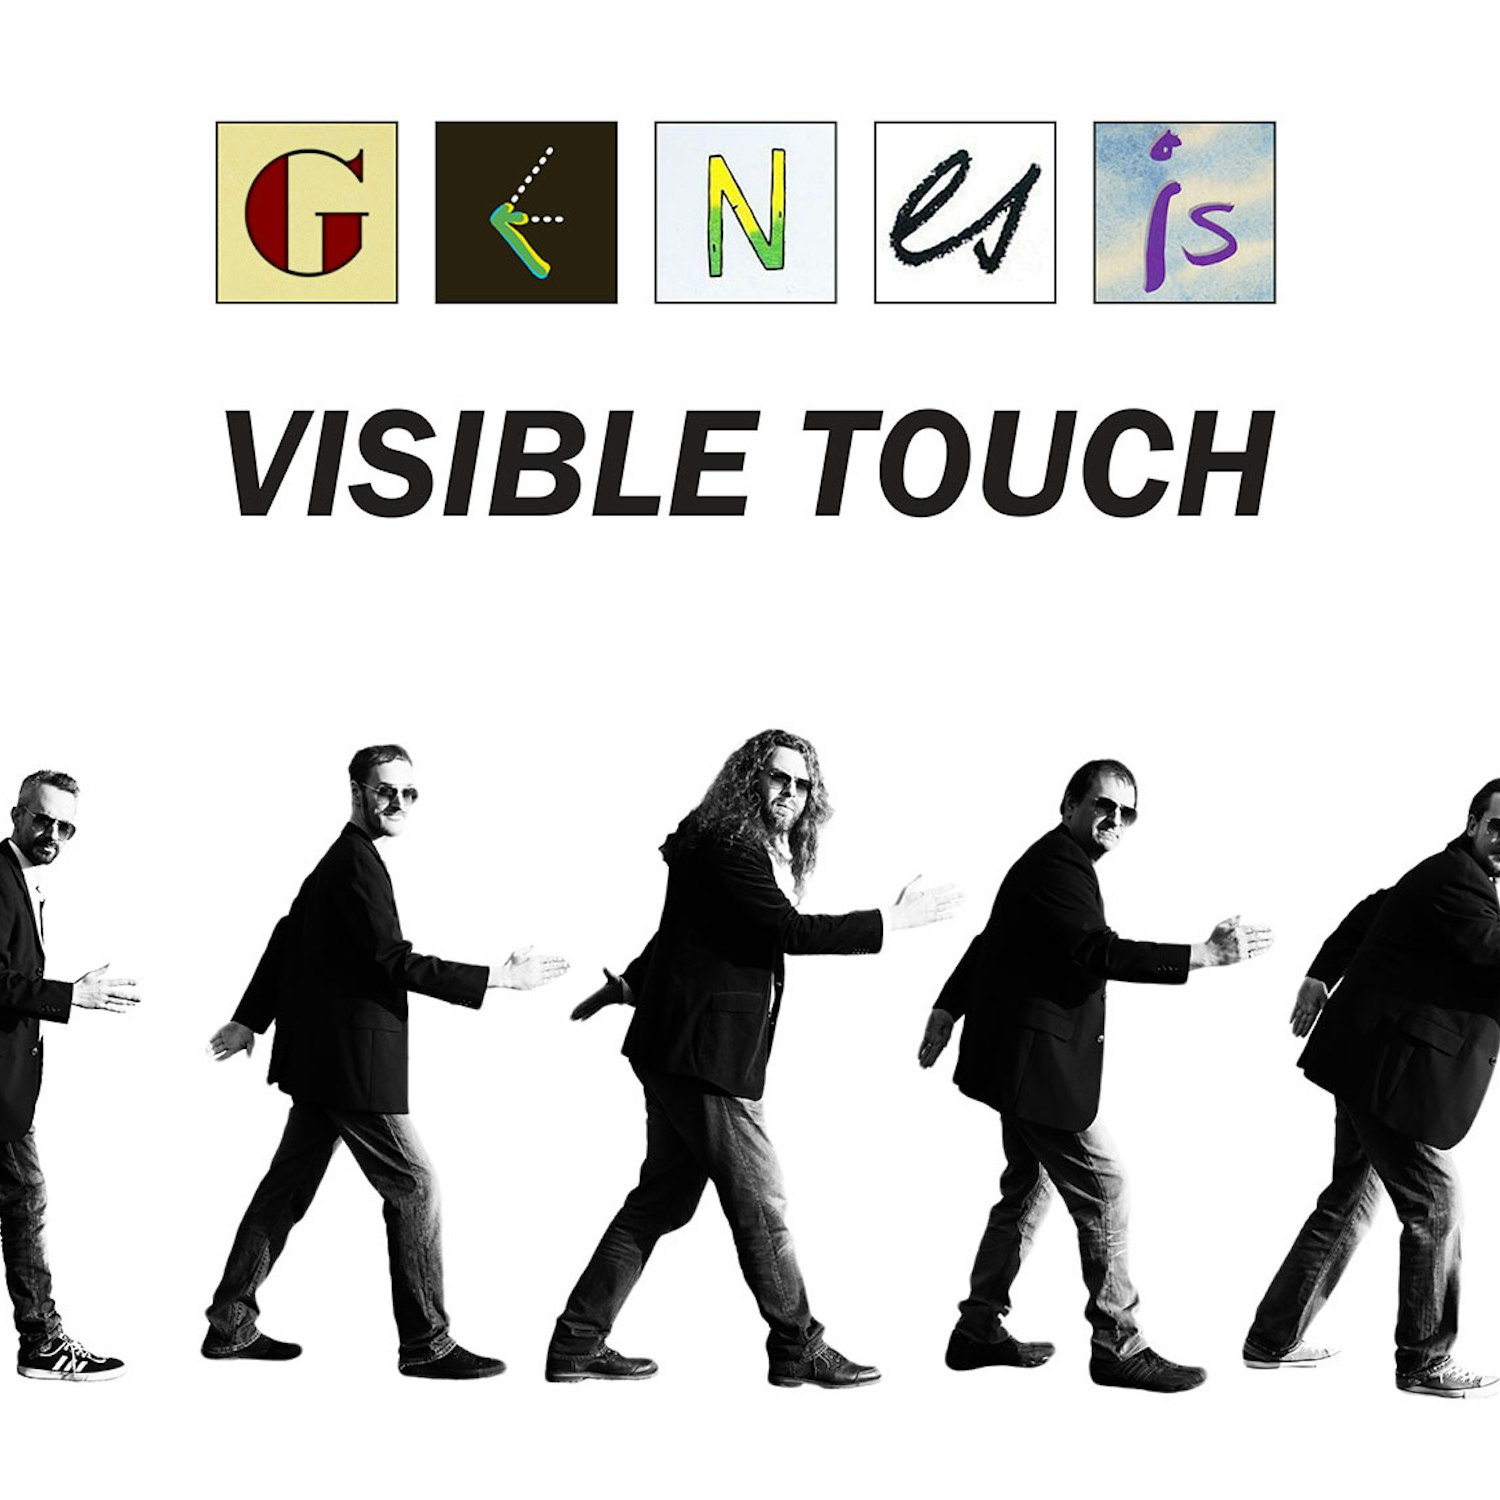 Genesis Visible Touch Tribute Band Tour Dates Tickets 2020